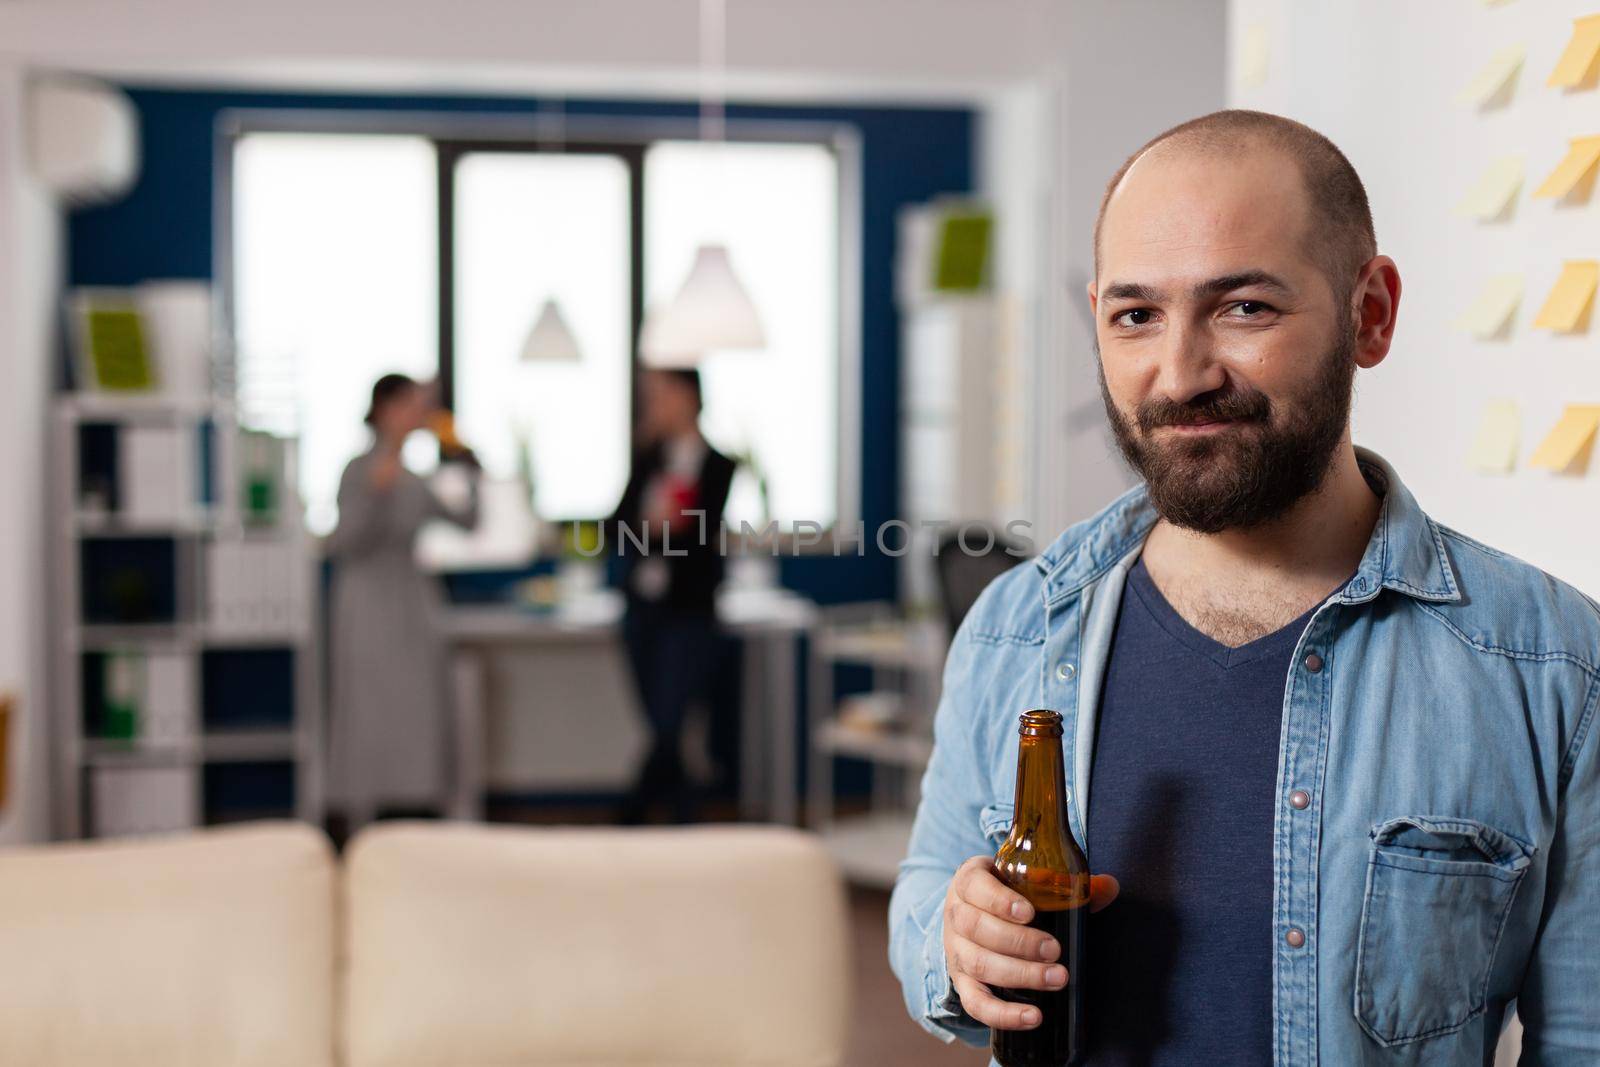 Caucasian man smiling and holding bottle of beer after work by DCStudio